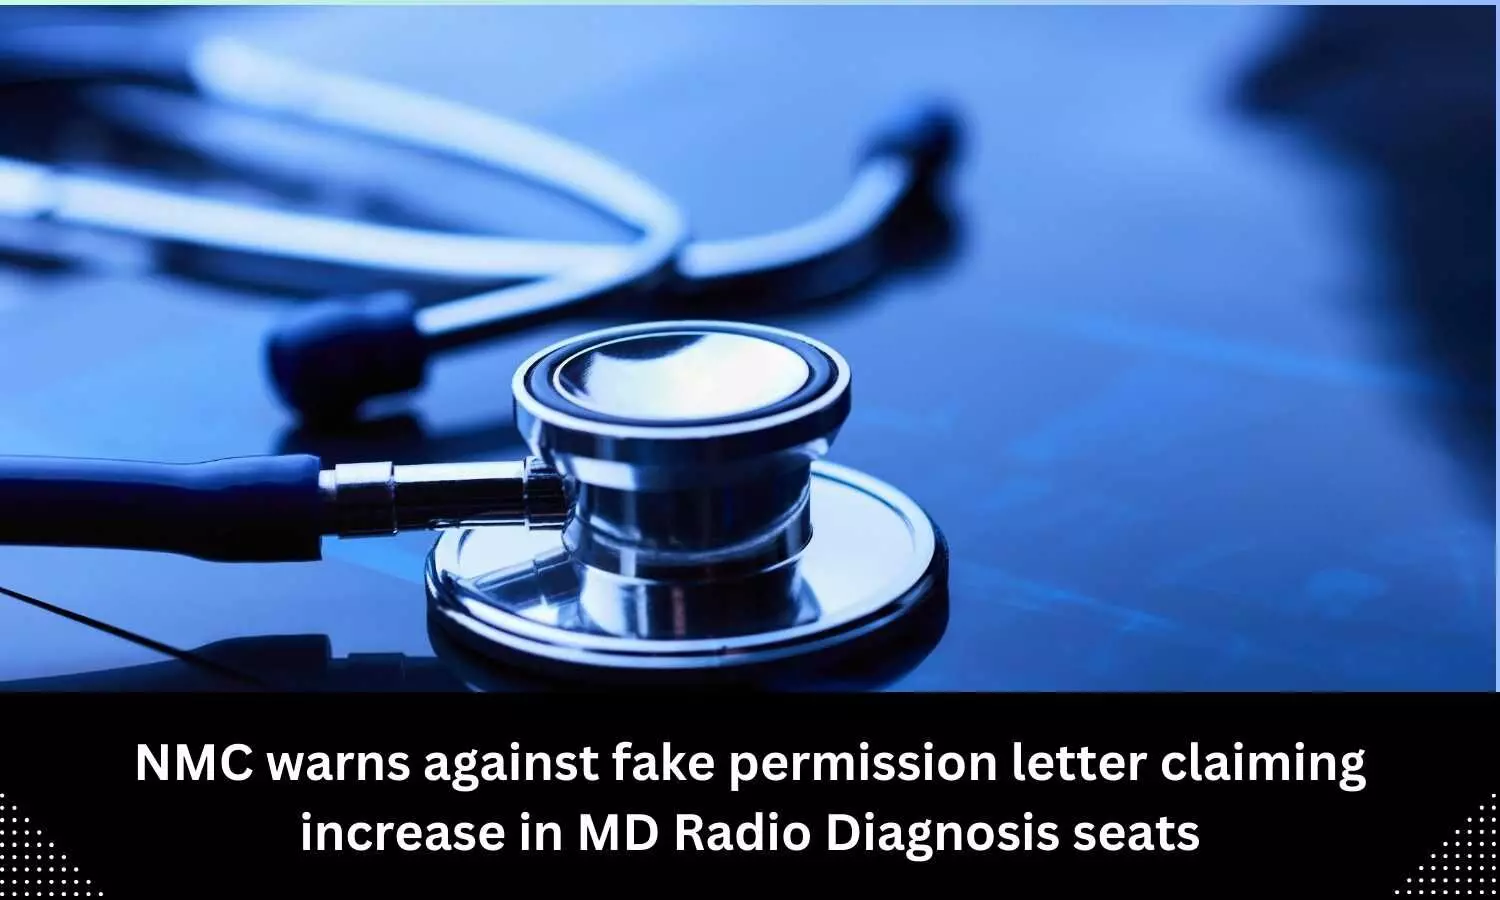 NMC warns against fake permission letter claiming increase in MD Radio Diagnosis seats